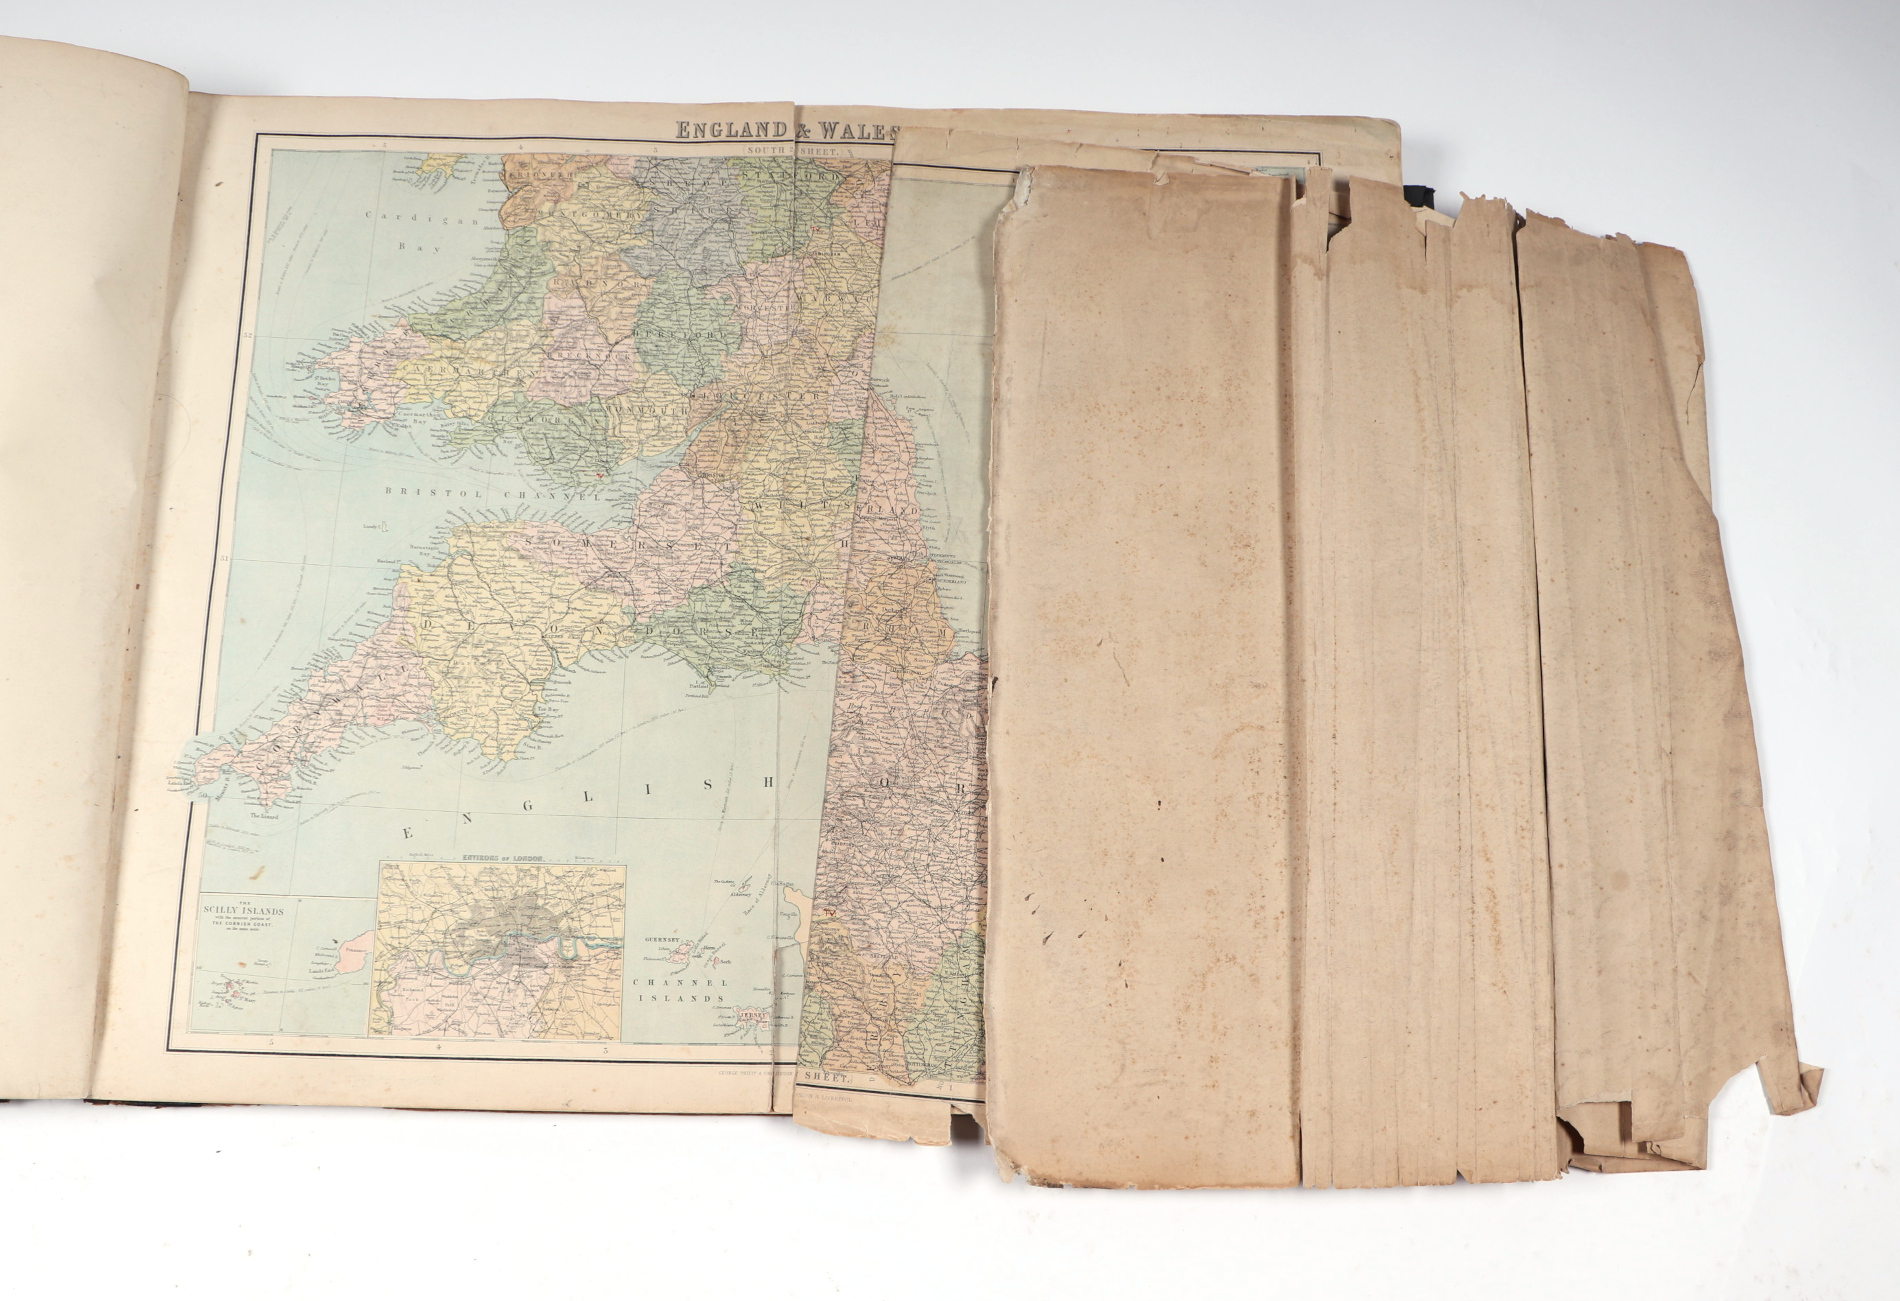 A late 19th century J. Bartholomew World Atlas published by George Philip & Son, London & Liverpool,